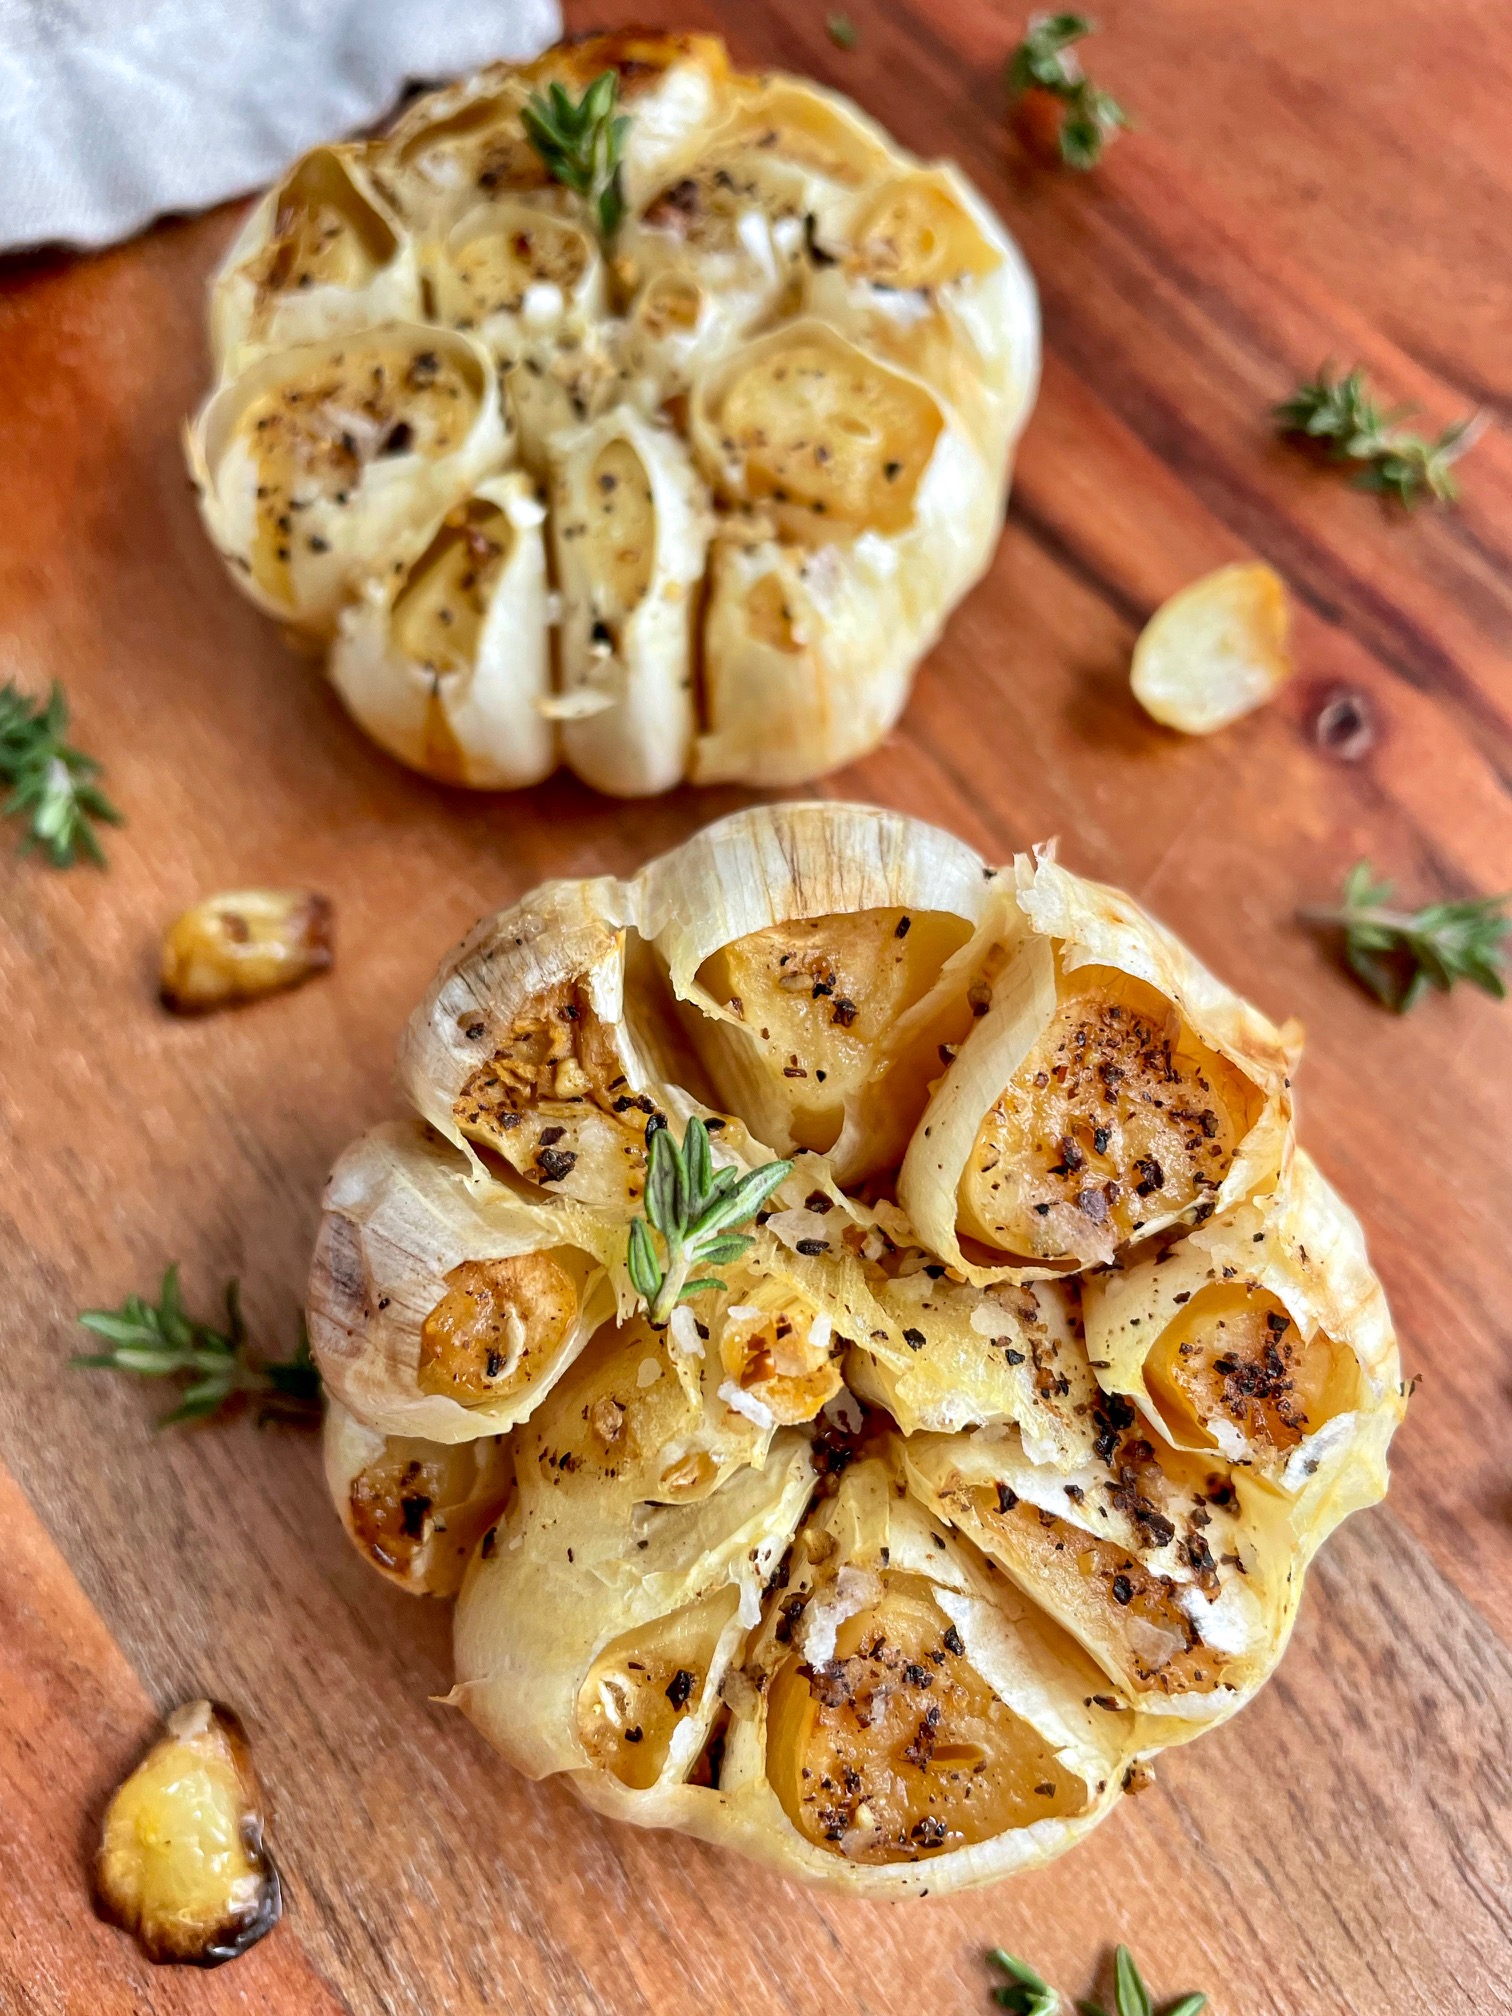 Two heads of air fryer roasted garlic.